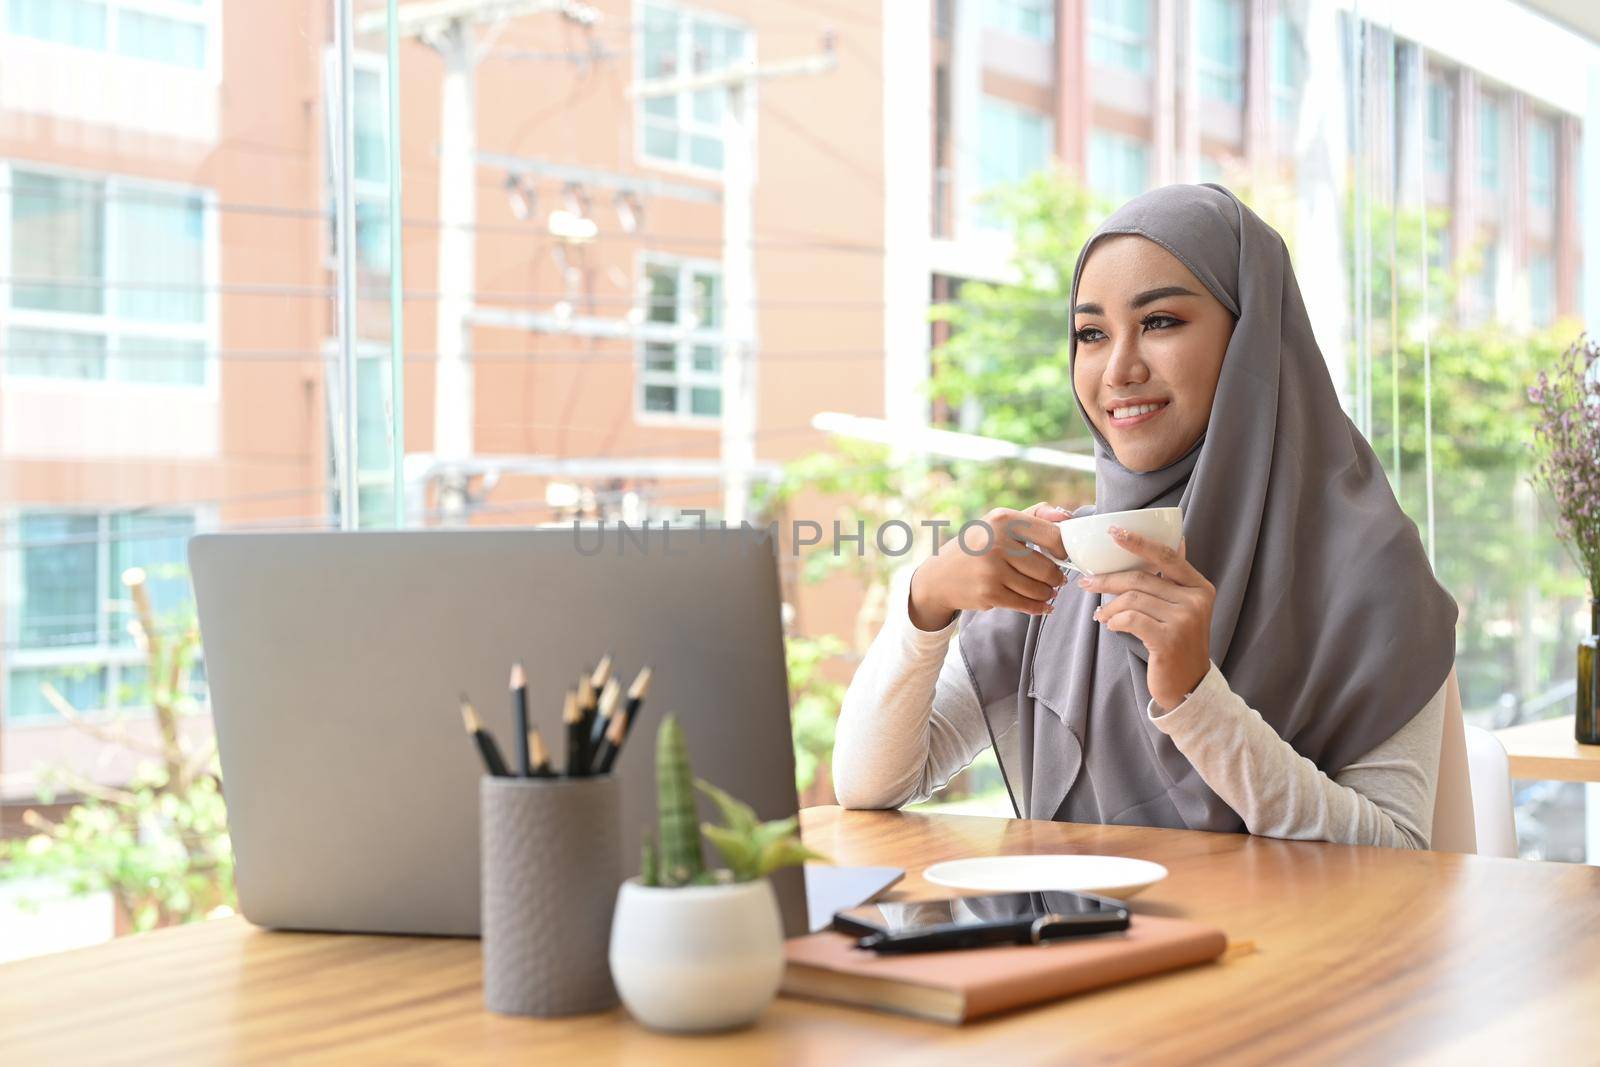 Thoughtful Muslim businesswoman drinking coffee and looking through glass office window, enjoying city view.